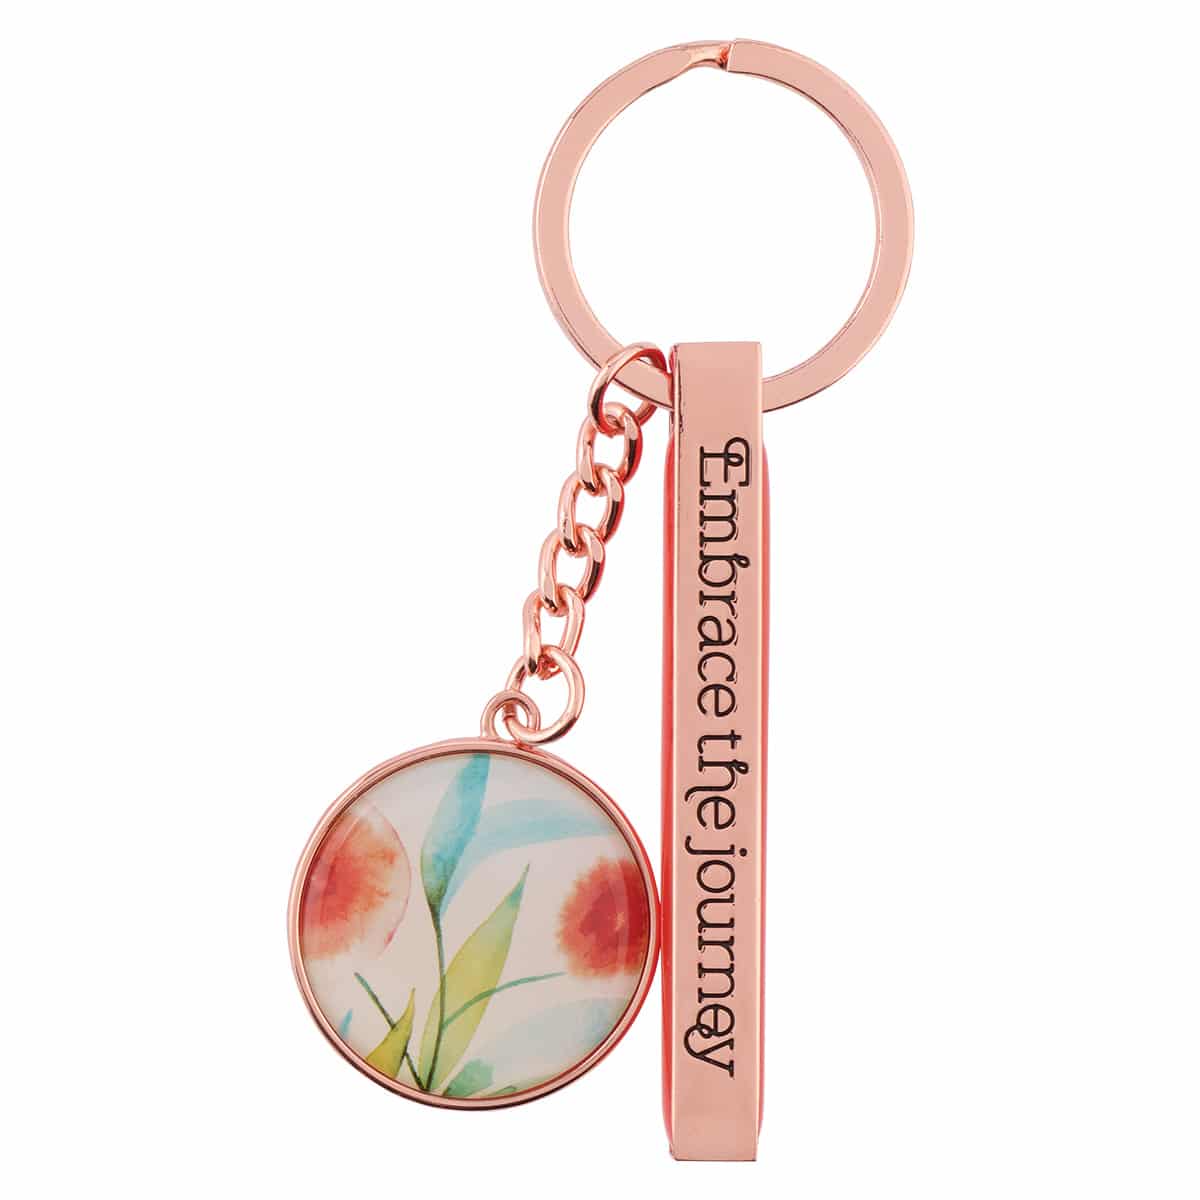 Embrace The Journey Orange Blossoms Rose Gold Key Ring - With Love